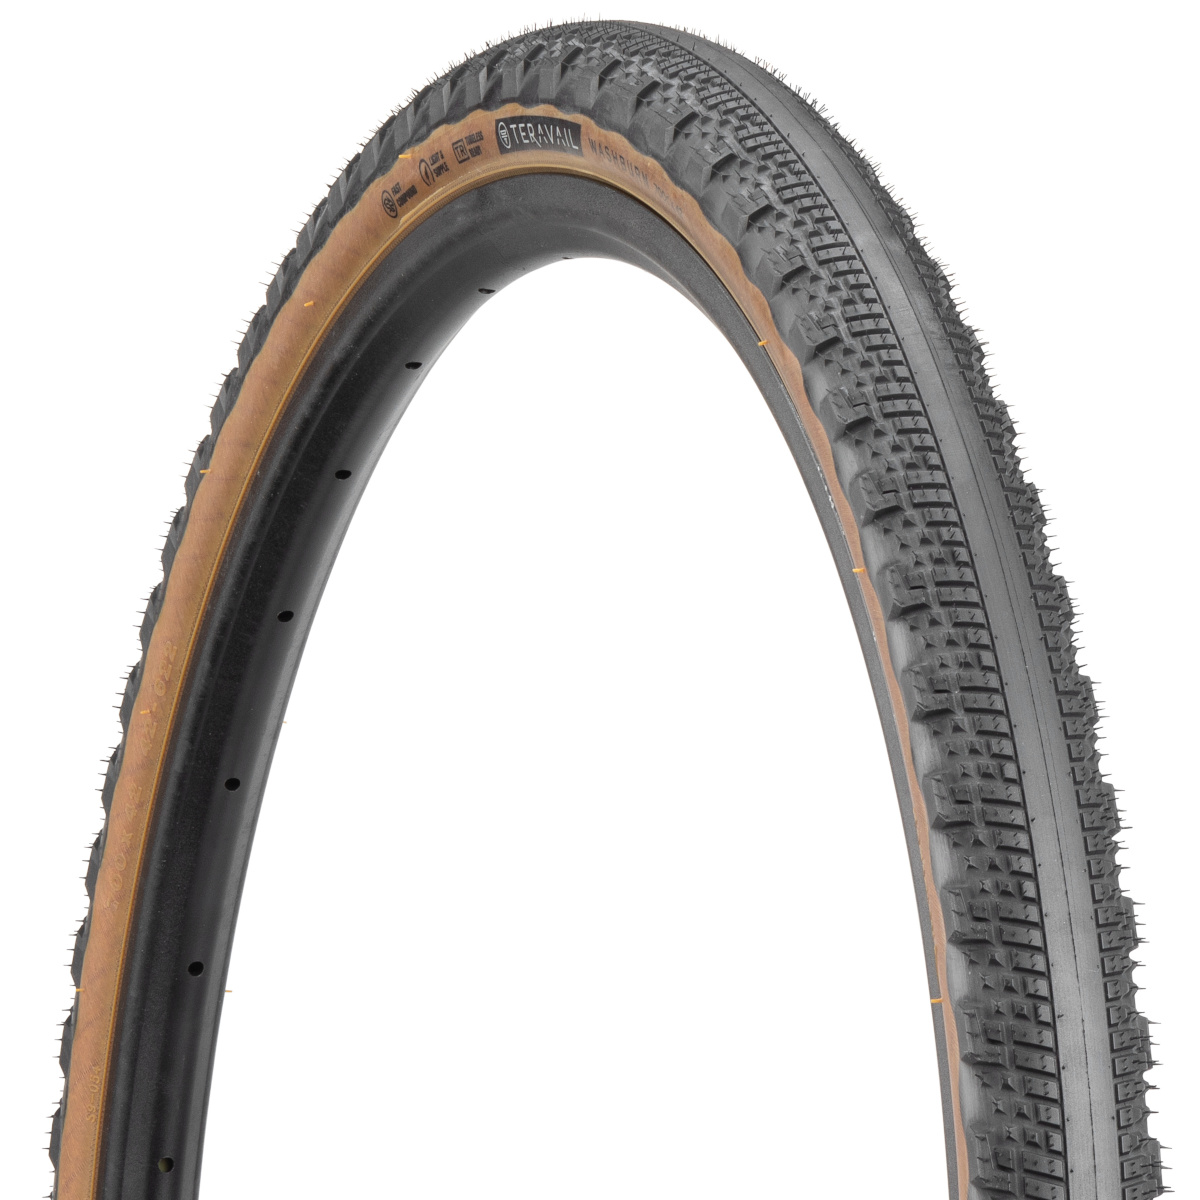 Picture of Teravail Washburn Folding Tire - Light and Supple - 42-622 - black / tanwall